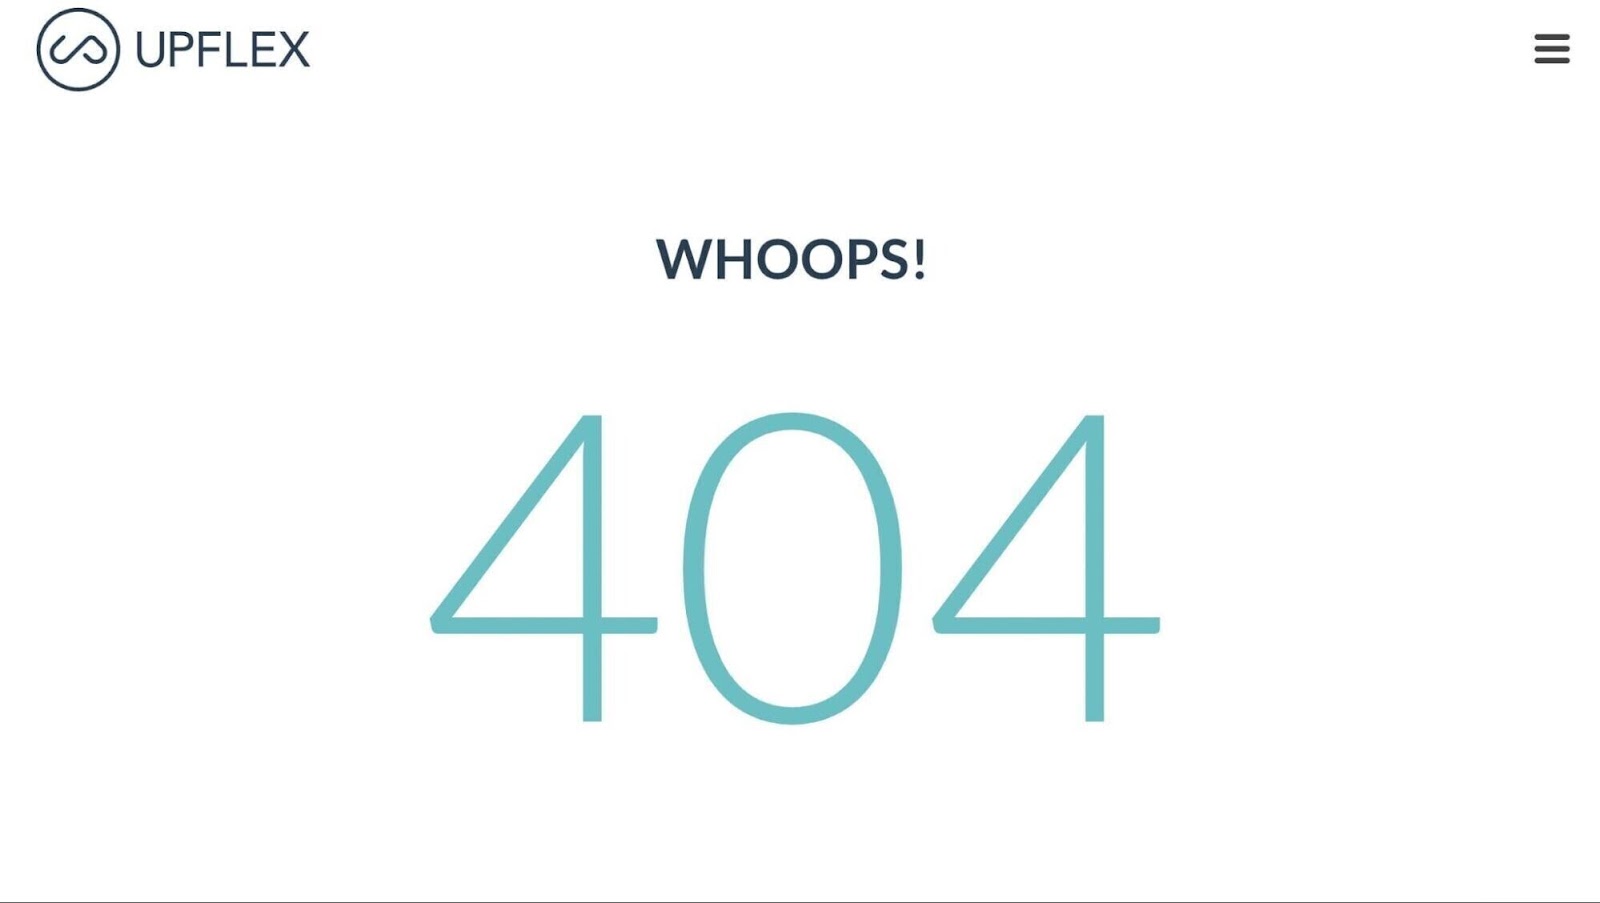 Upflex's 404 error page that reads "Whoops" 404"